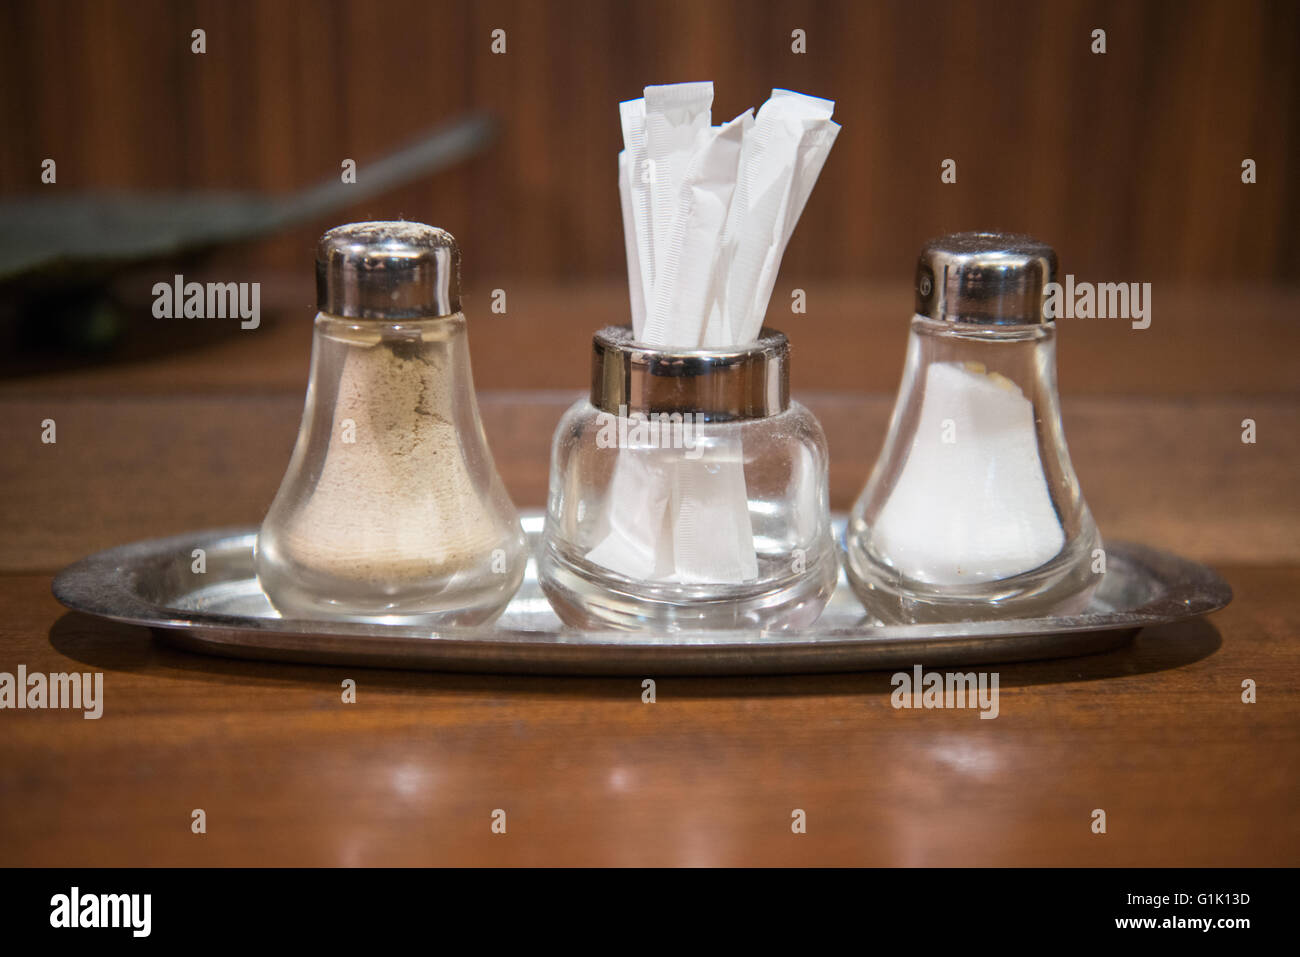 Table top condiments of salt and pepper, and tooth picks Stock Photo